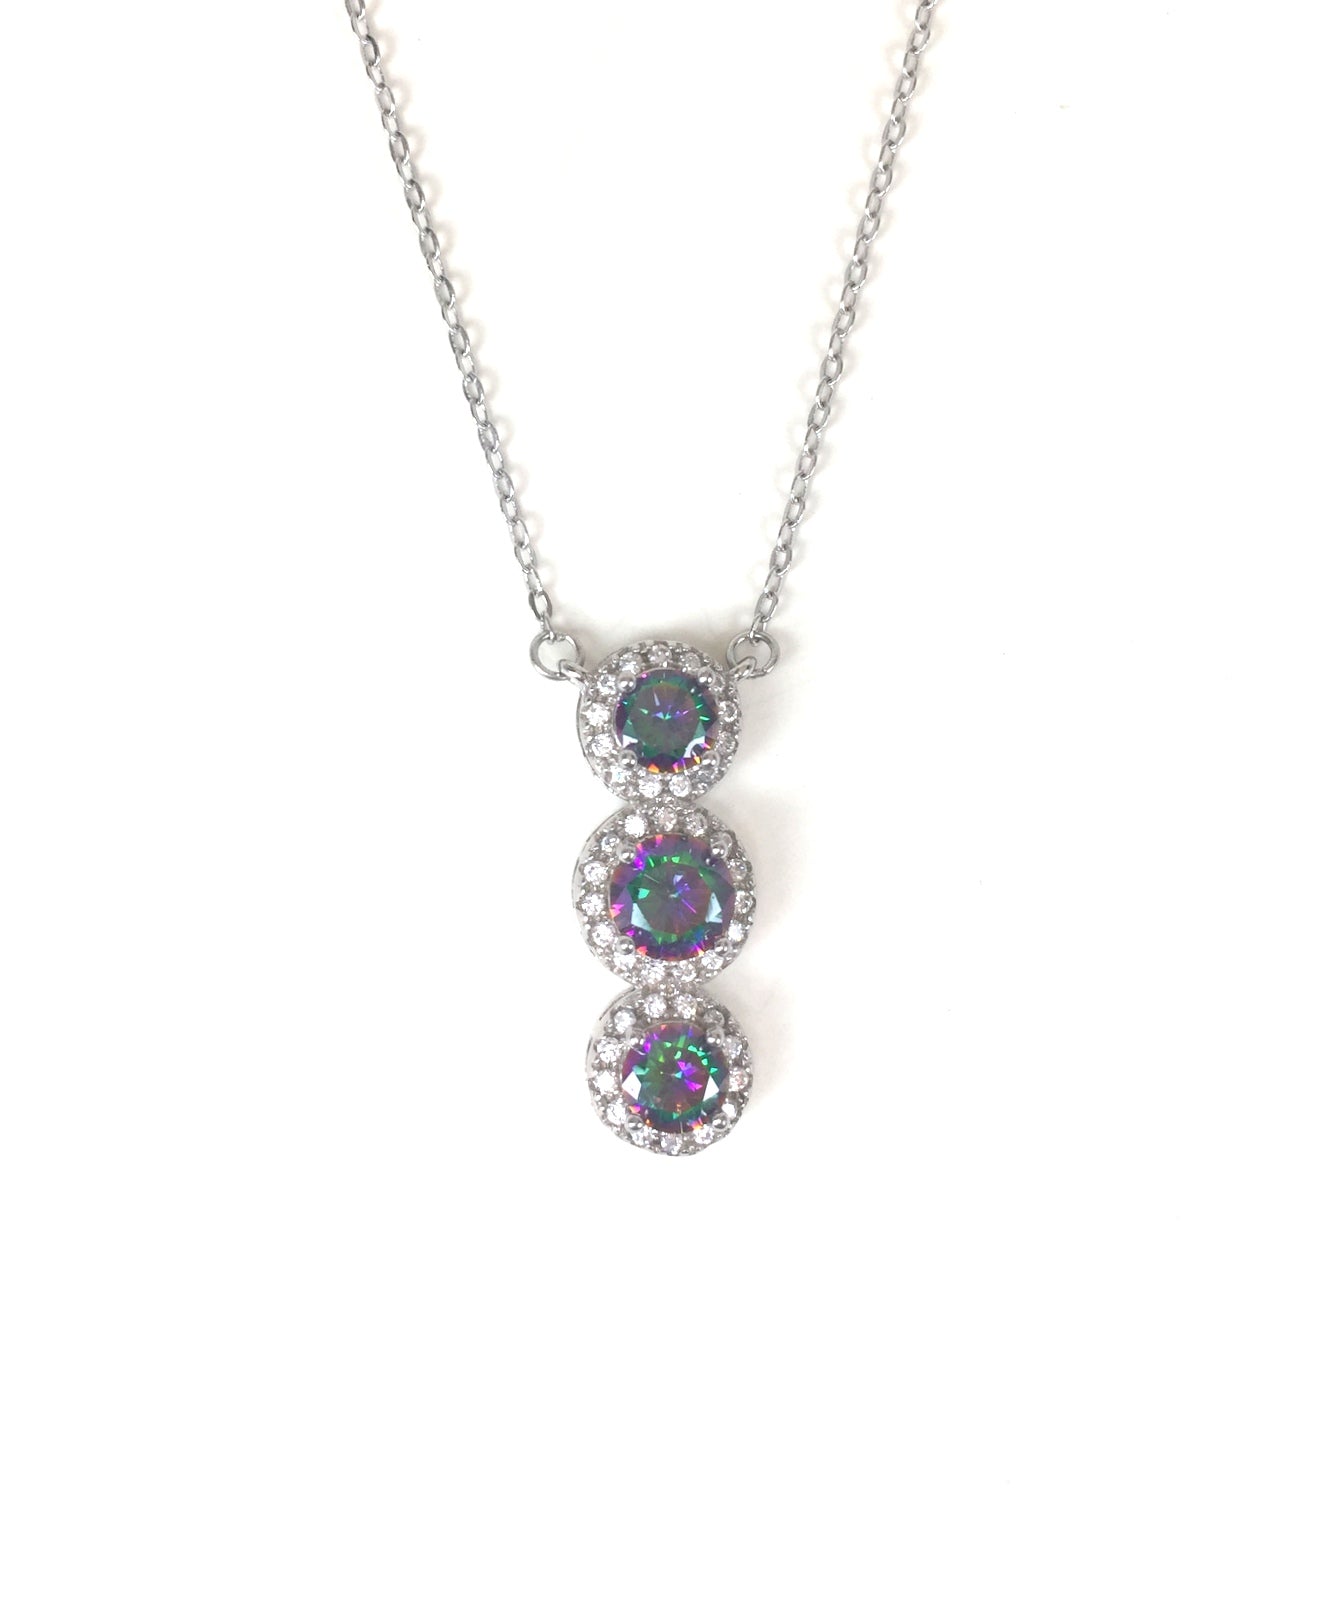 VERTICAL STONES PAVE CZ STERLING SILVER NECKLACE